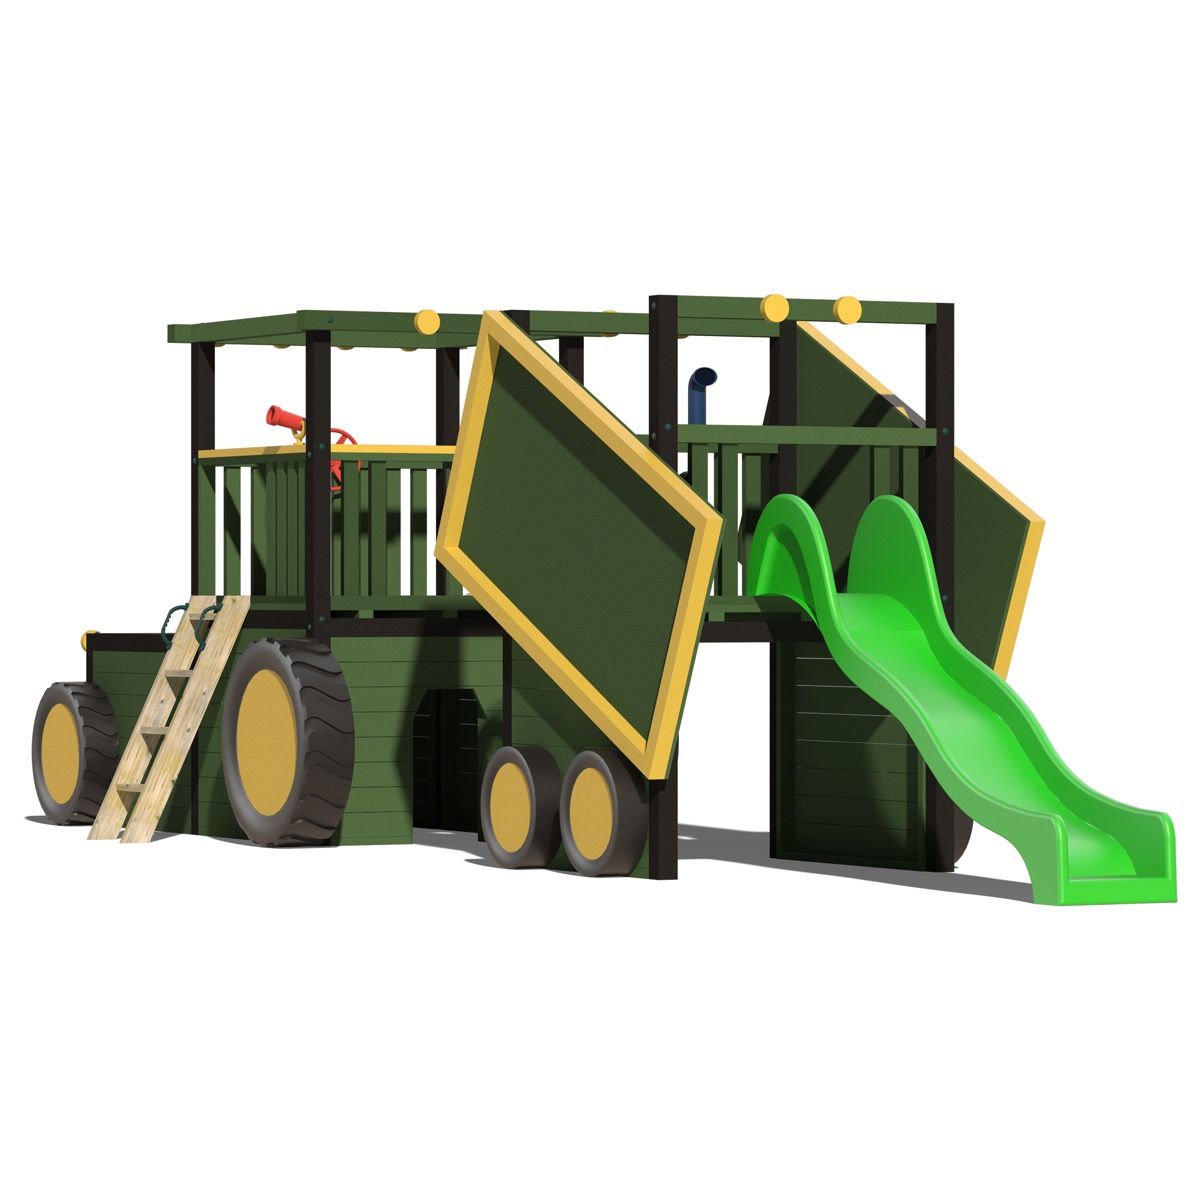 Kids Climbing Frame Complete with 2 Sets of Steps, Slide and Rockwall - Commercial Tractor and Trailer